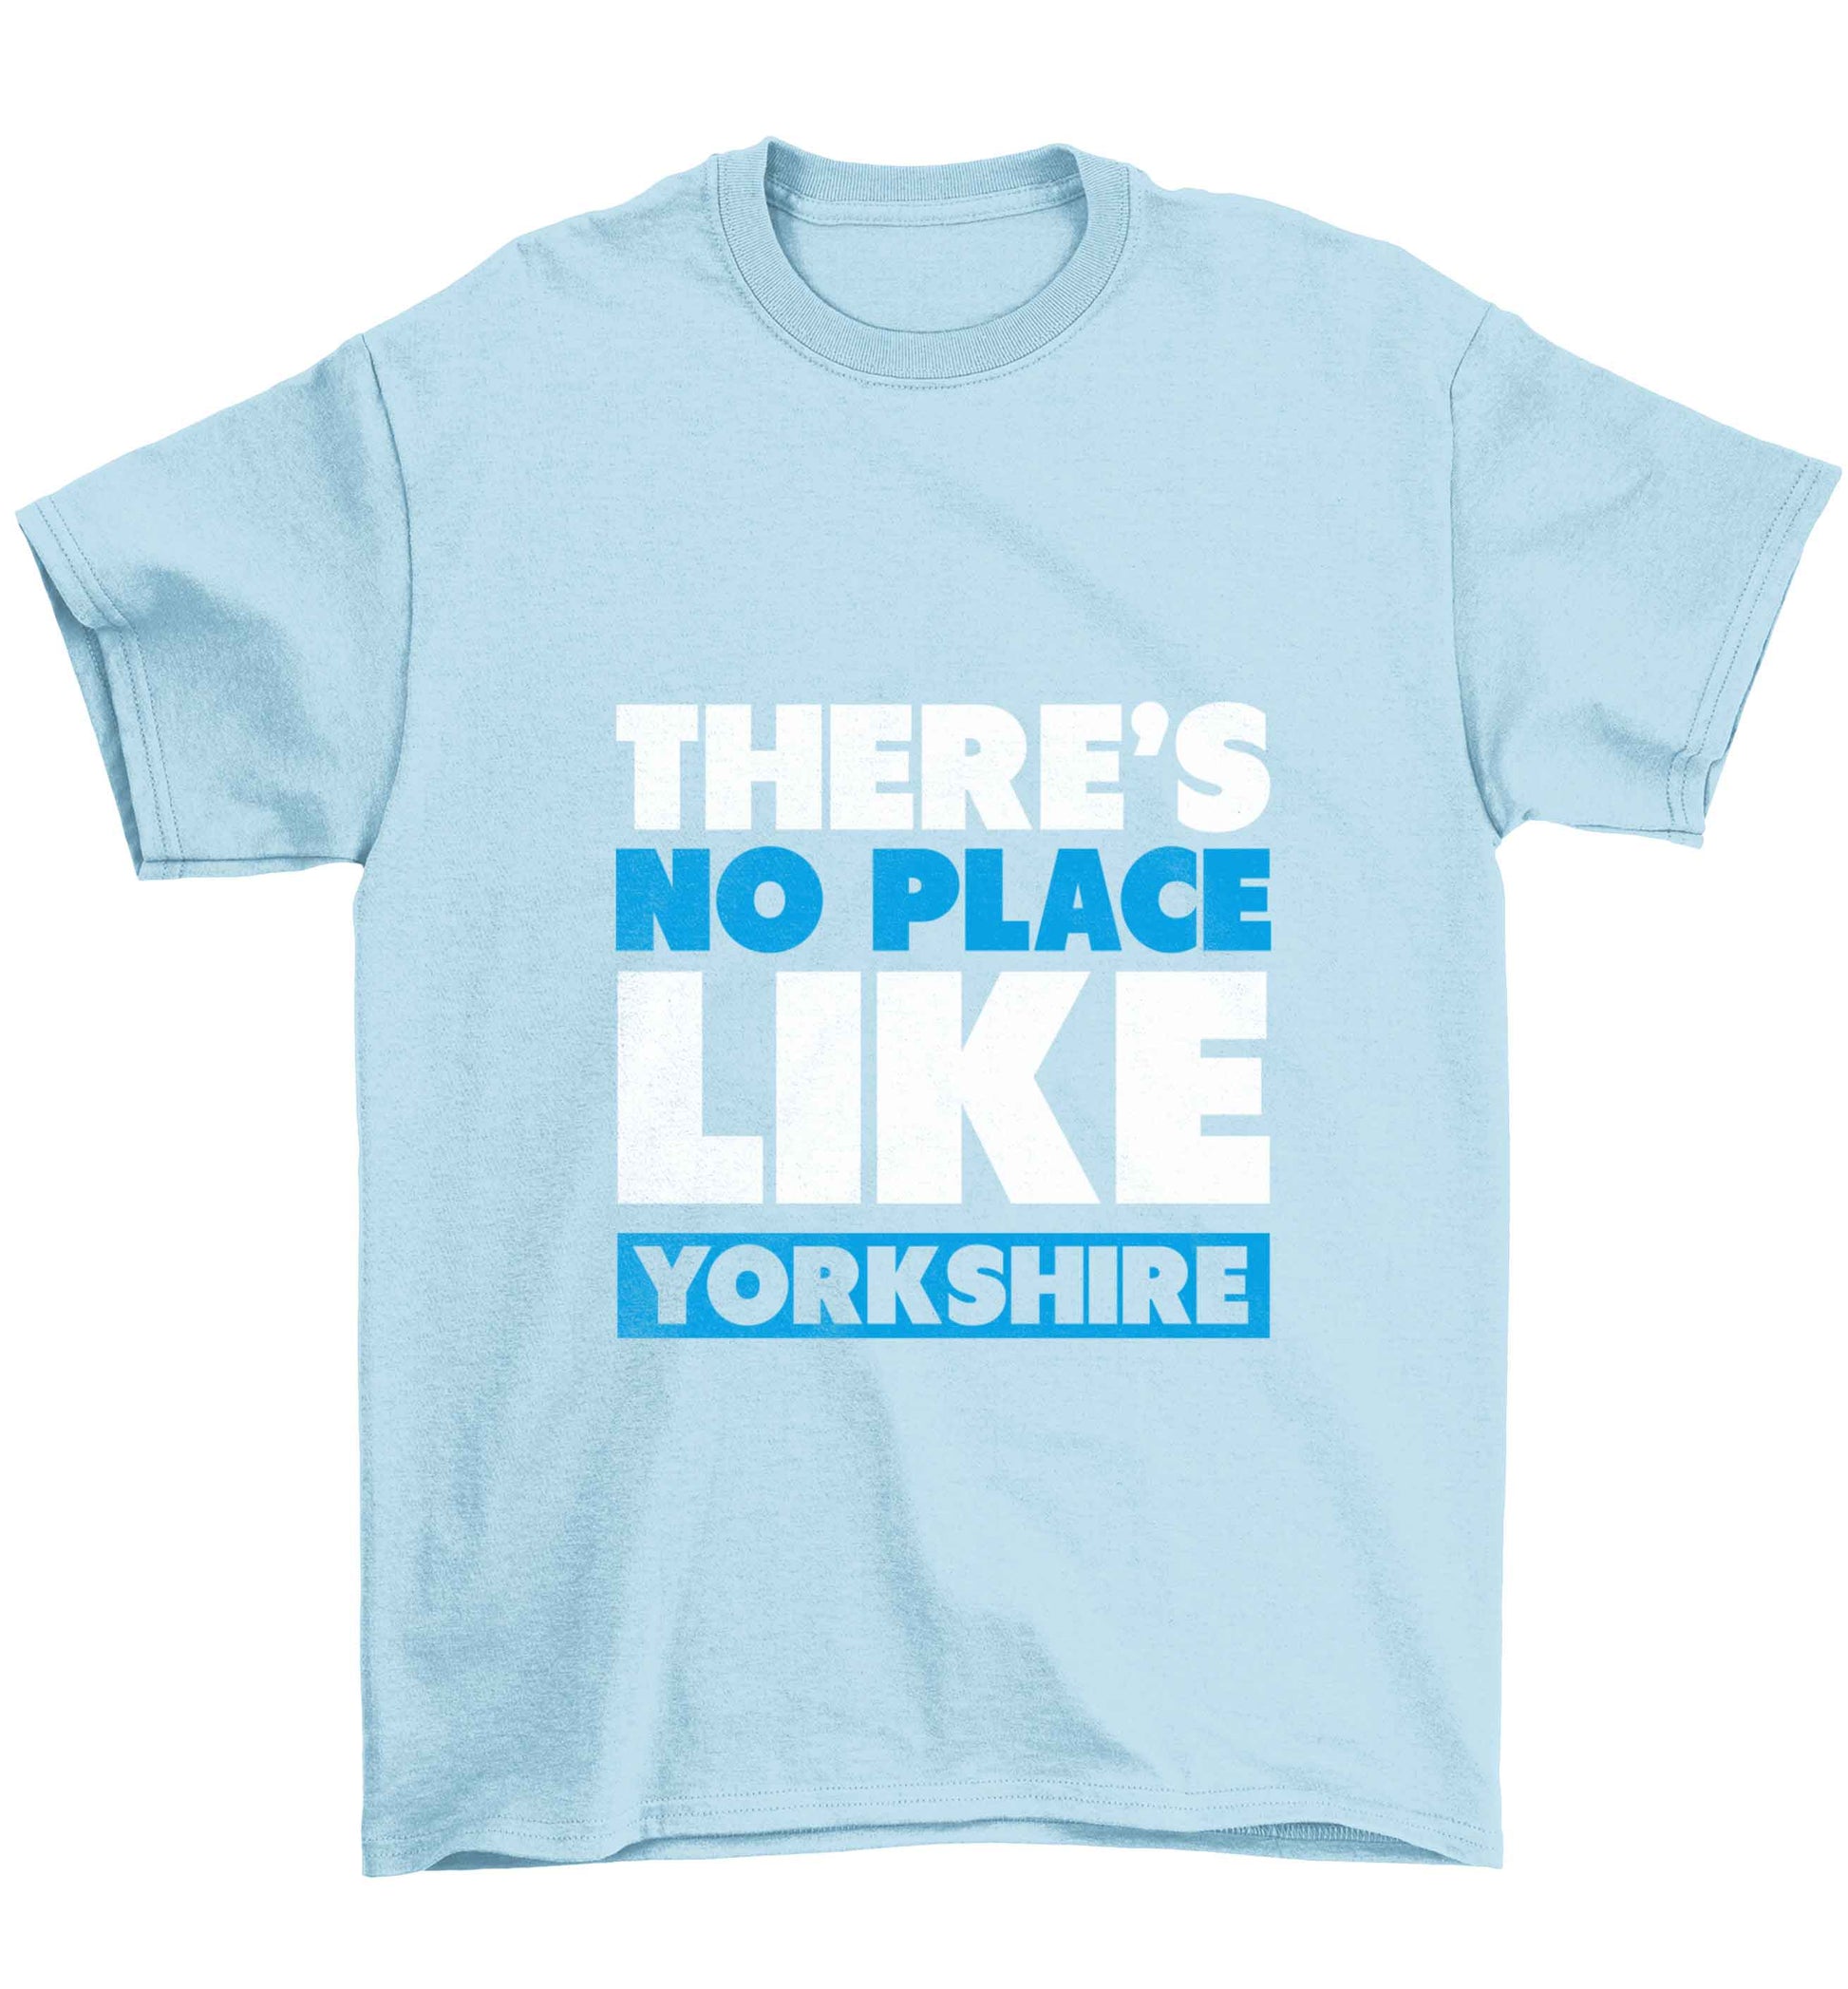 There's no place like Yorkshire Children's light blue Tshirt 12-13 Years